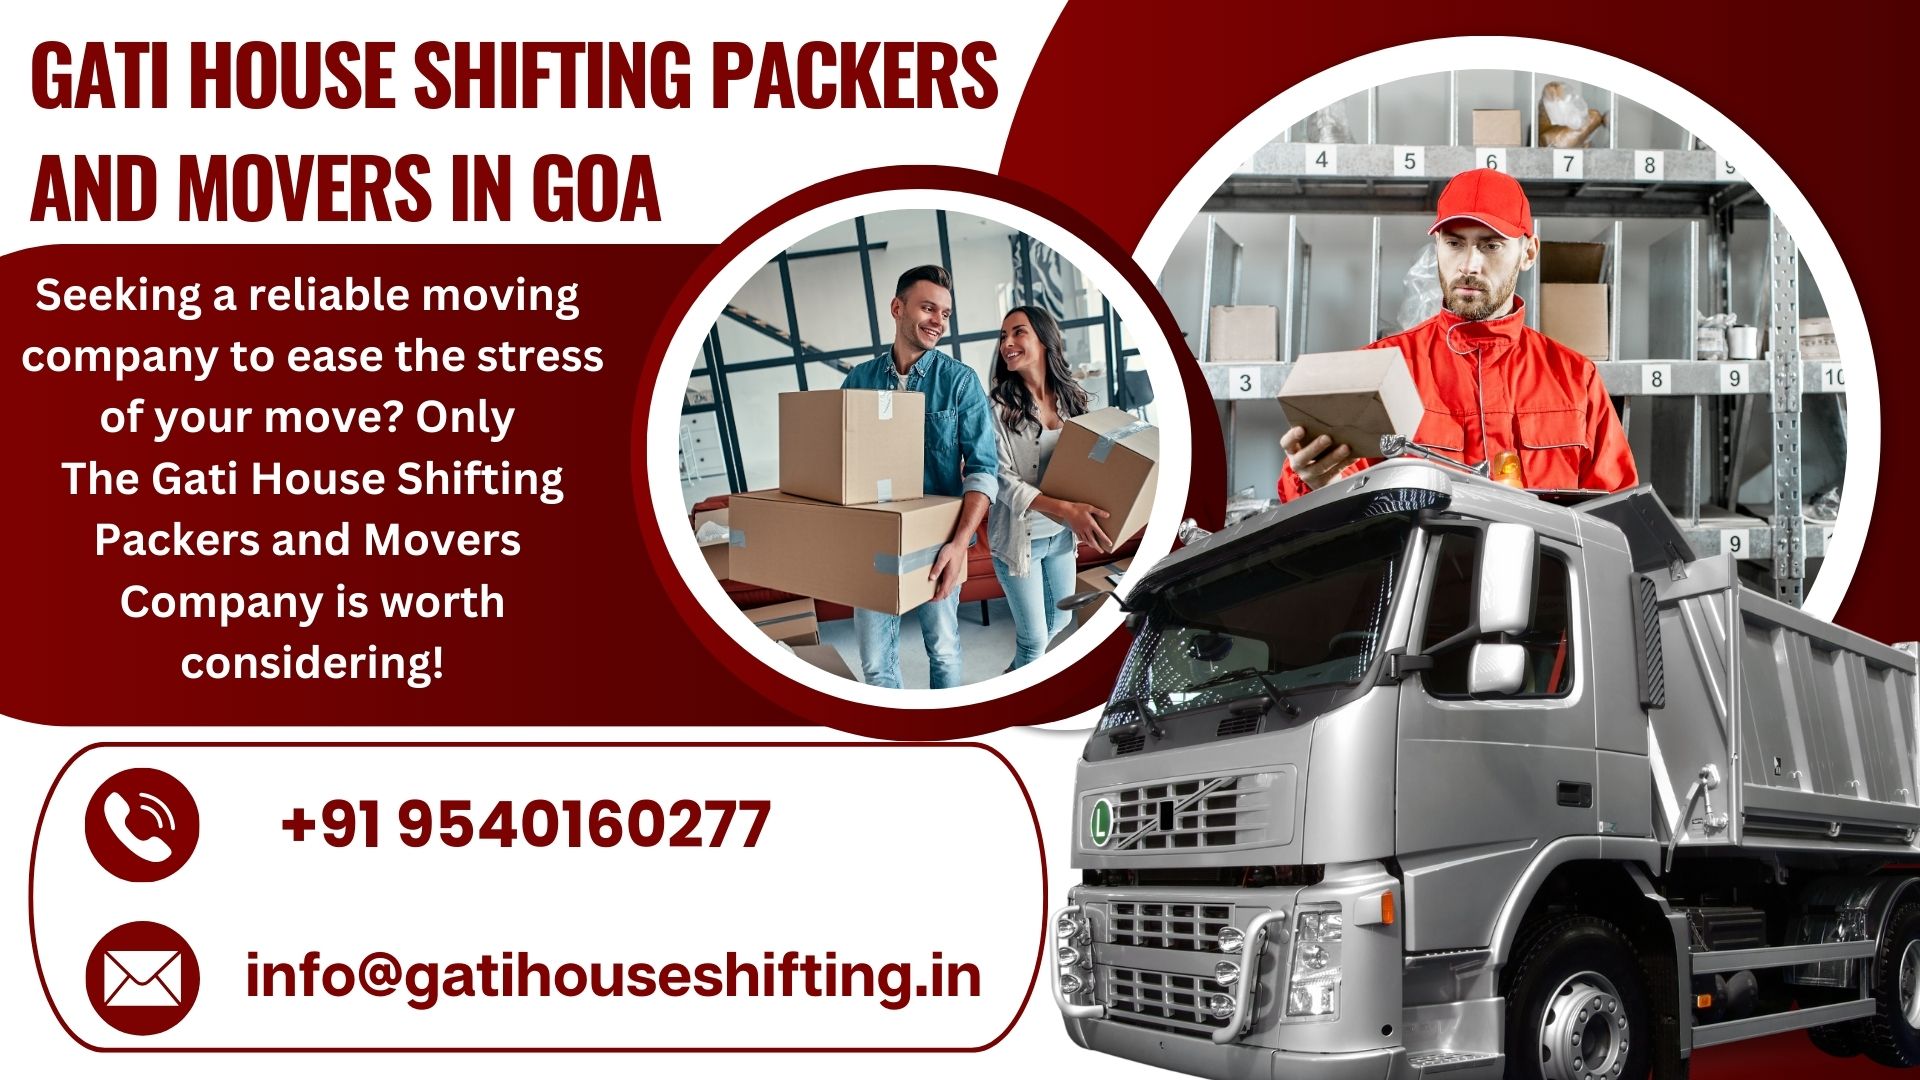 Reliable Moving Services with Gati Movers and Packers in Goa